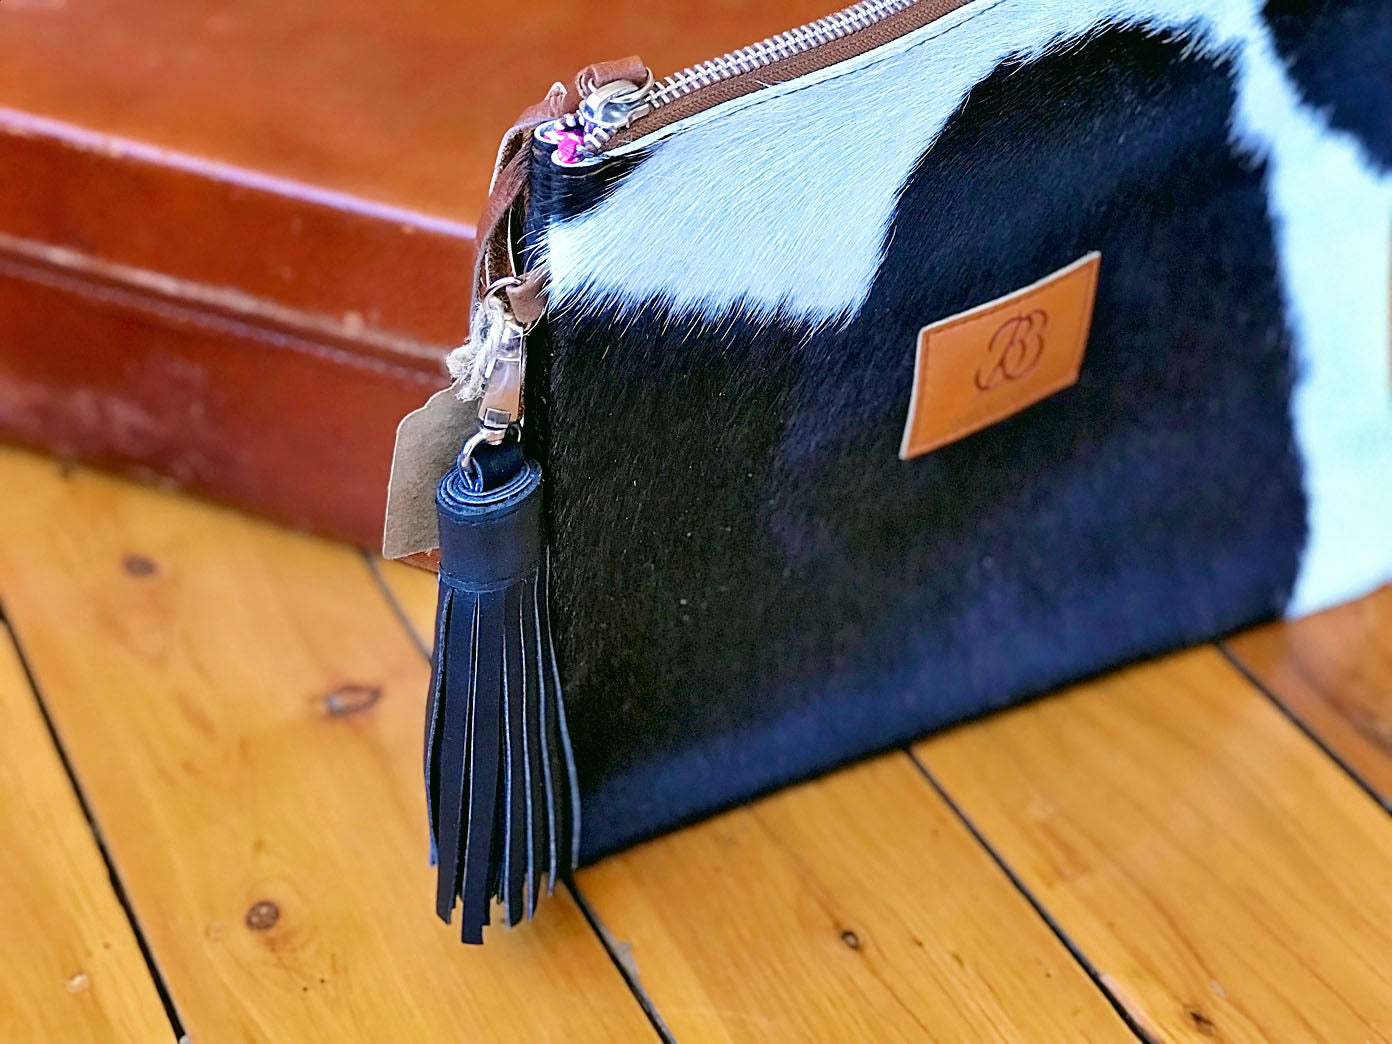 Tassel Charger - iPhone